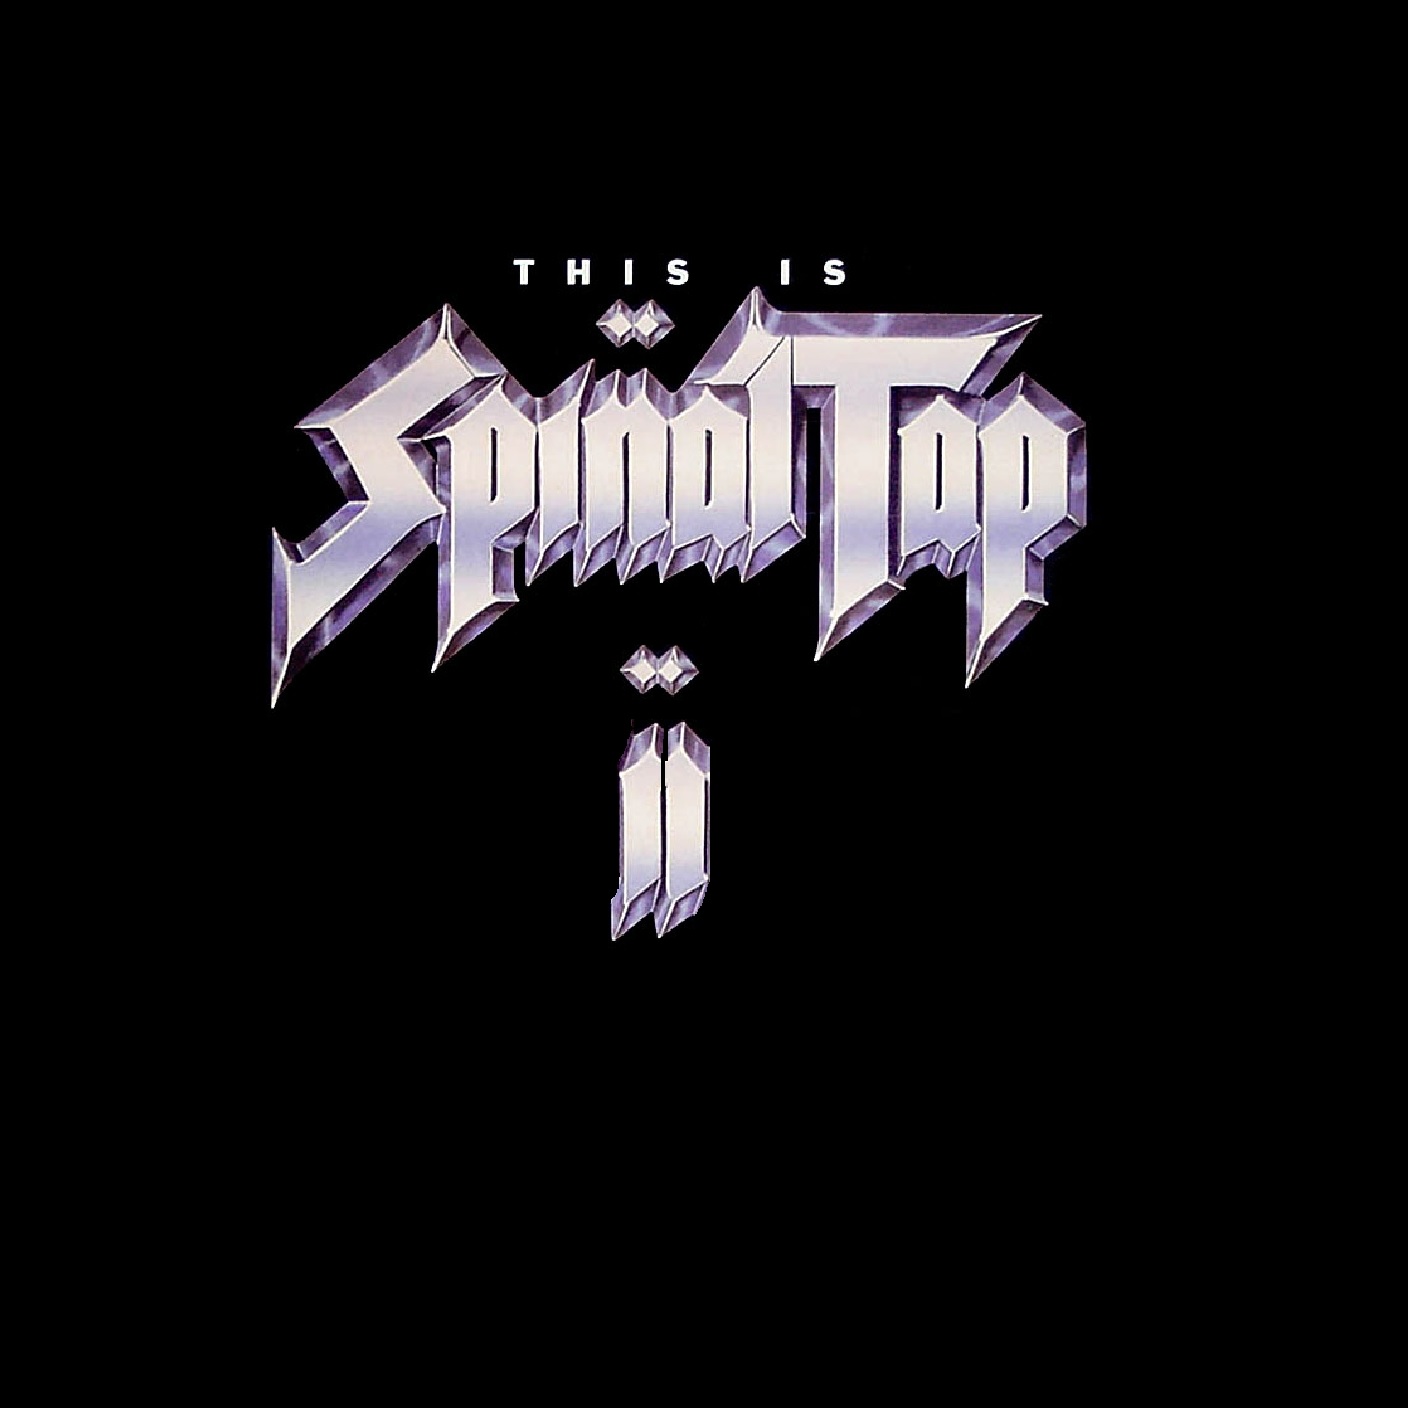 Episode 78 - This Is Spinal Tap 2 feat. Aaron Merena